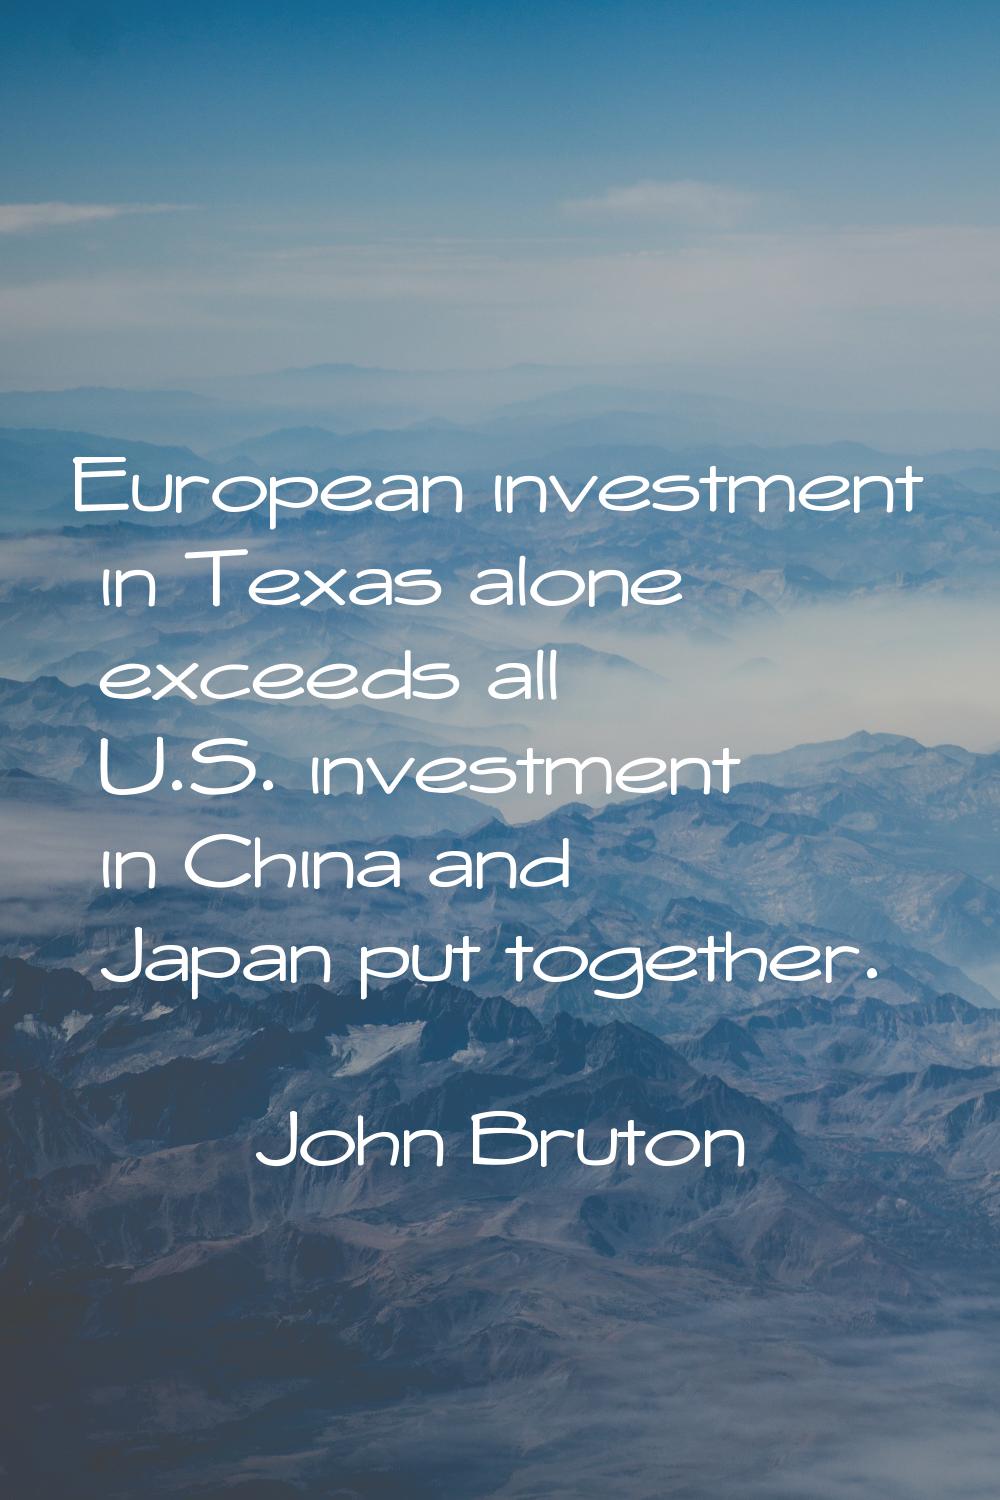 European investment in Texas alone exceeds all U.S. investment in China and Japan put together.